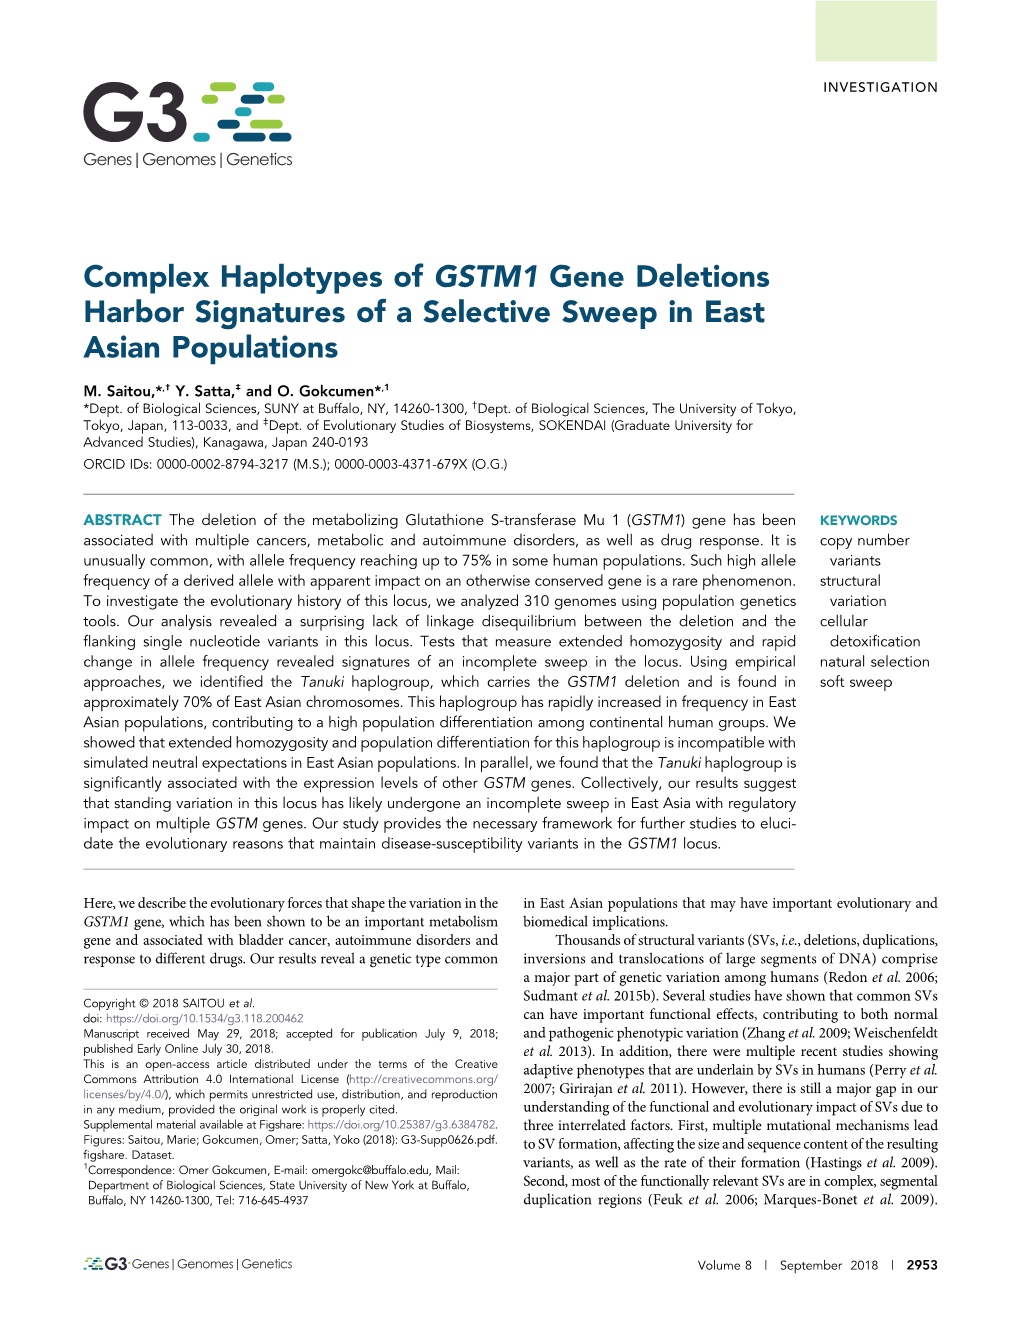 Complex Haplotypes of GSTM1 Gene Deletions Harbor Signatures of a Selective Sweep in East Asian Populations